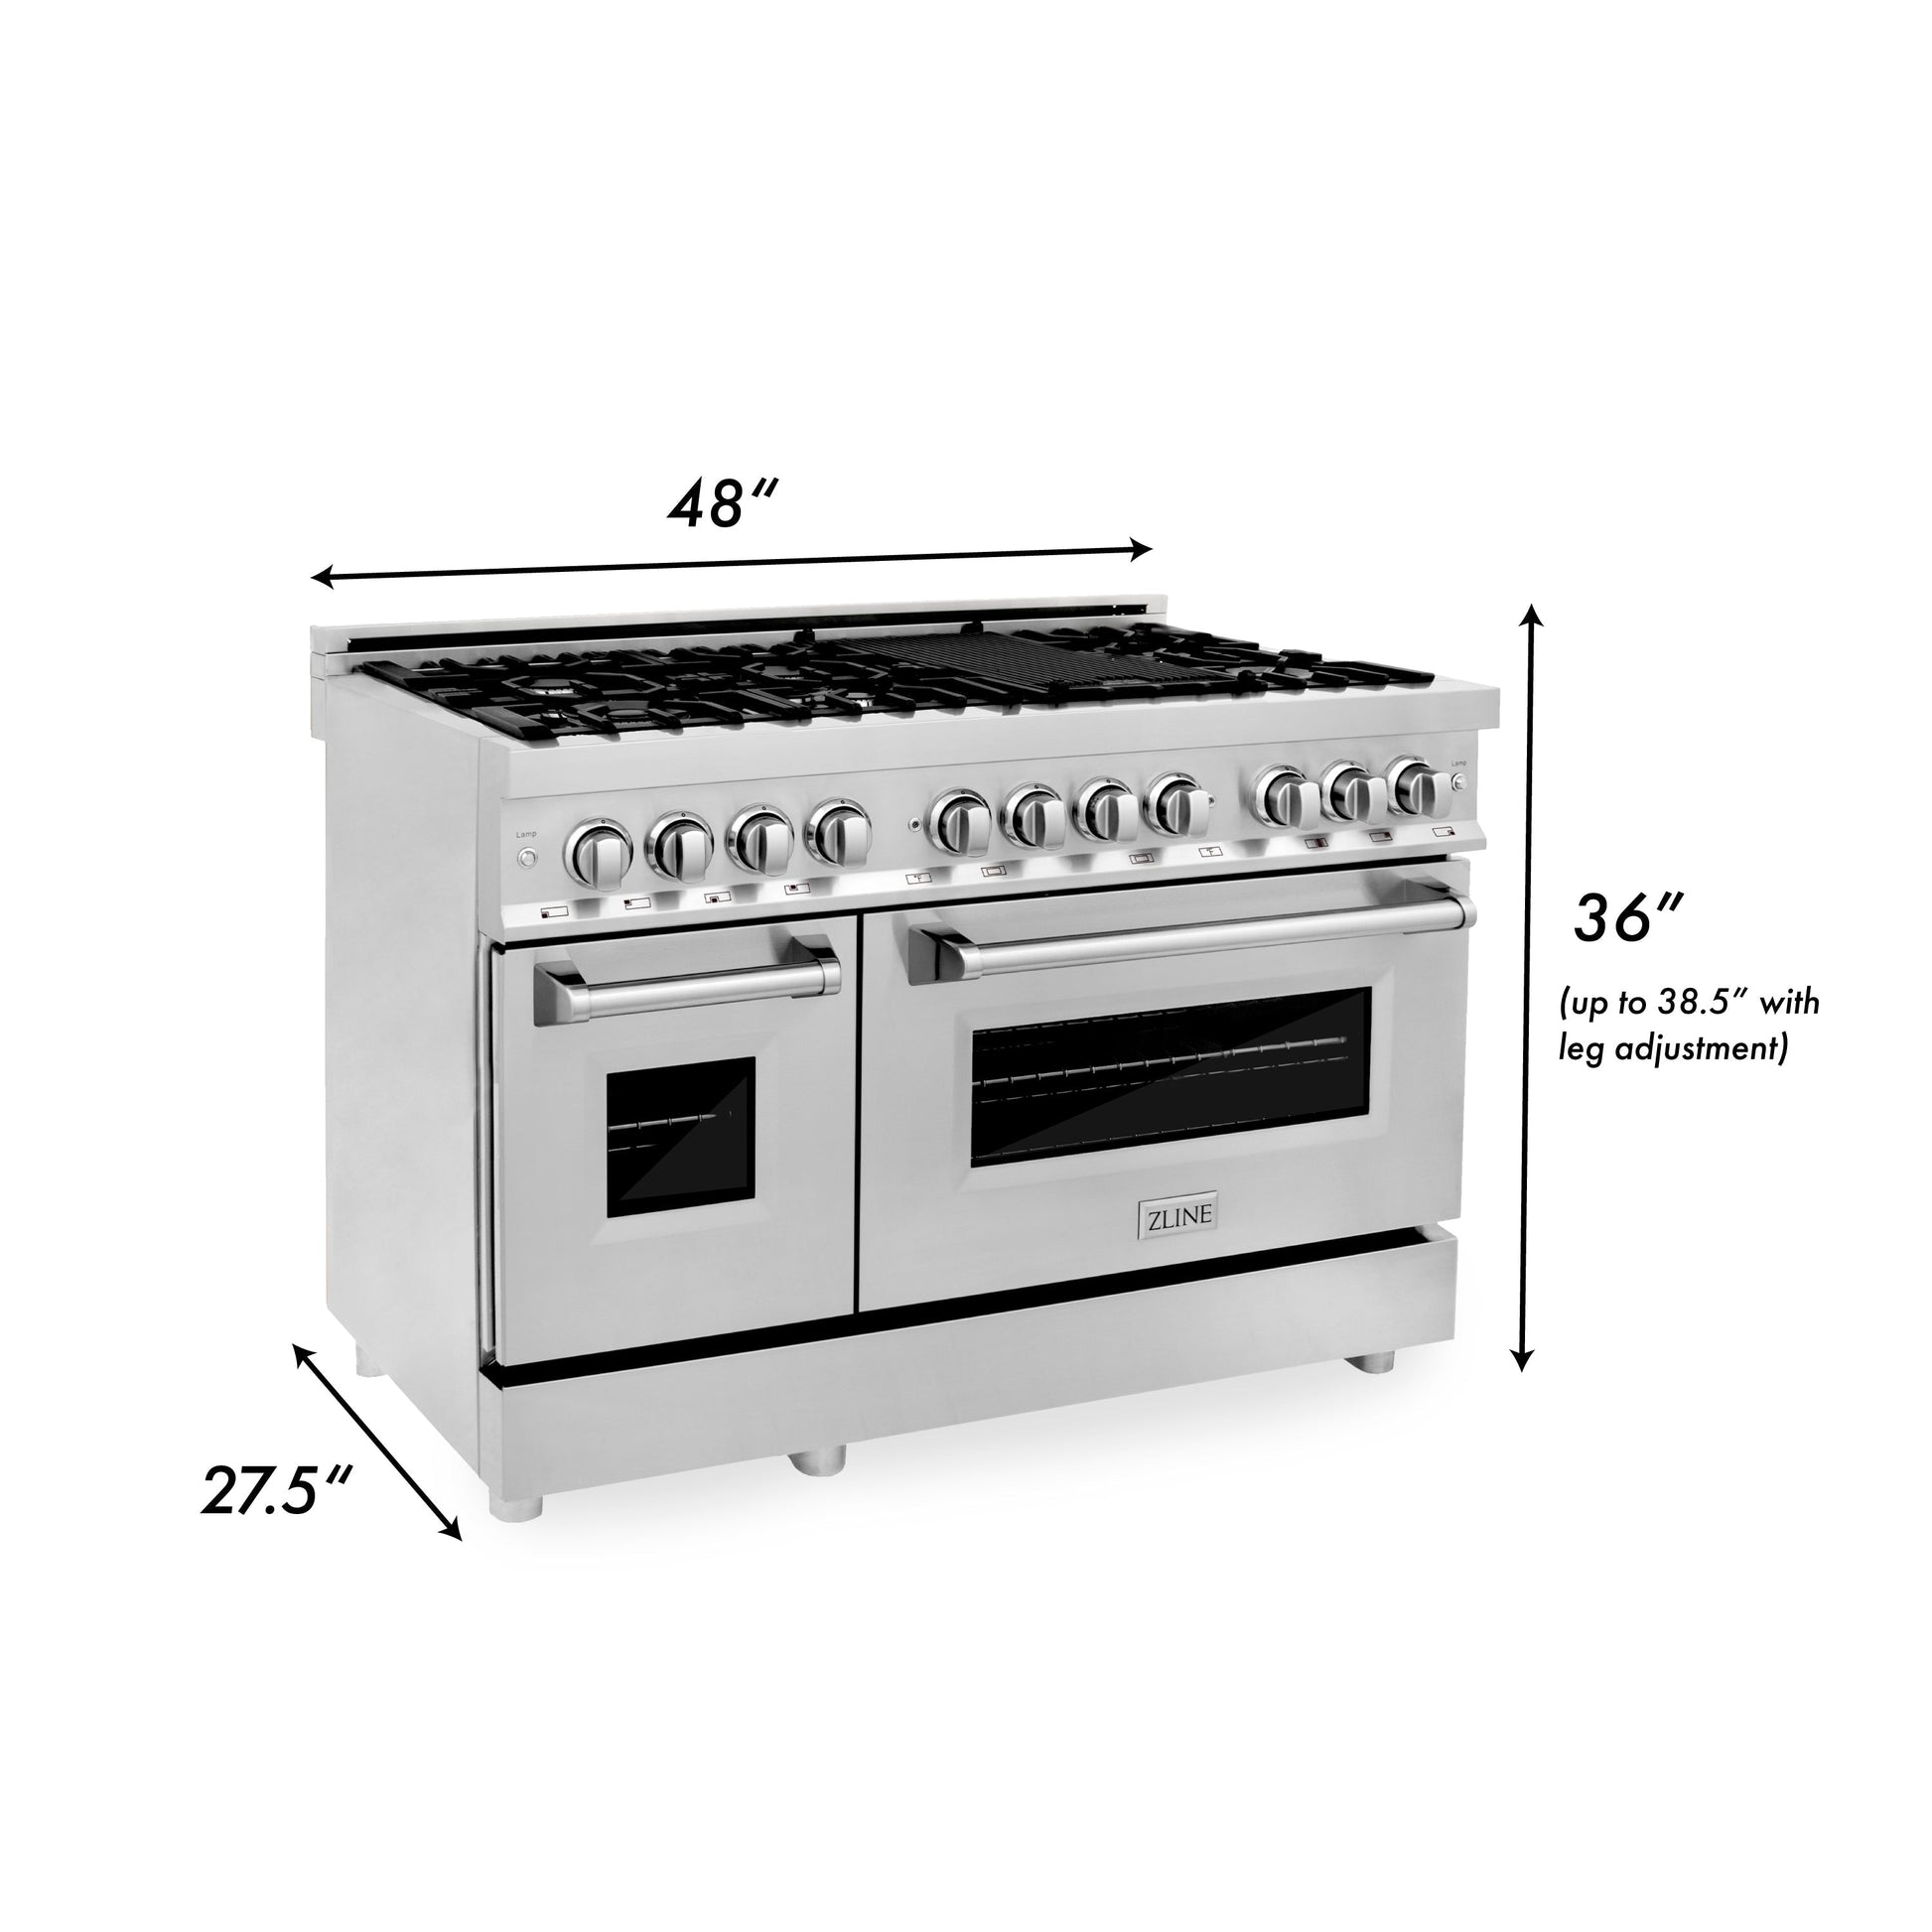 ZLINE 48" Dual Fuel Range with Electric Oven and Gas Cooktop with Griddle - Stainless Steel